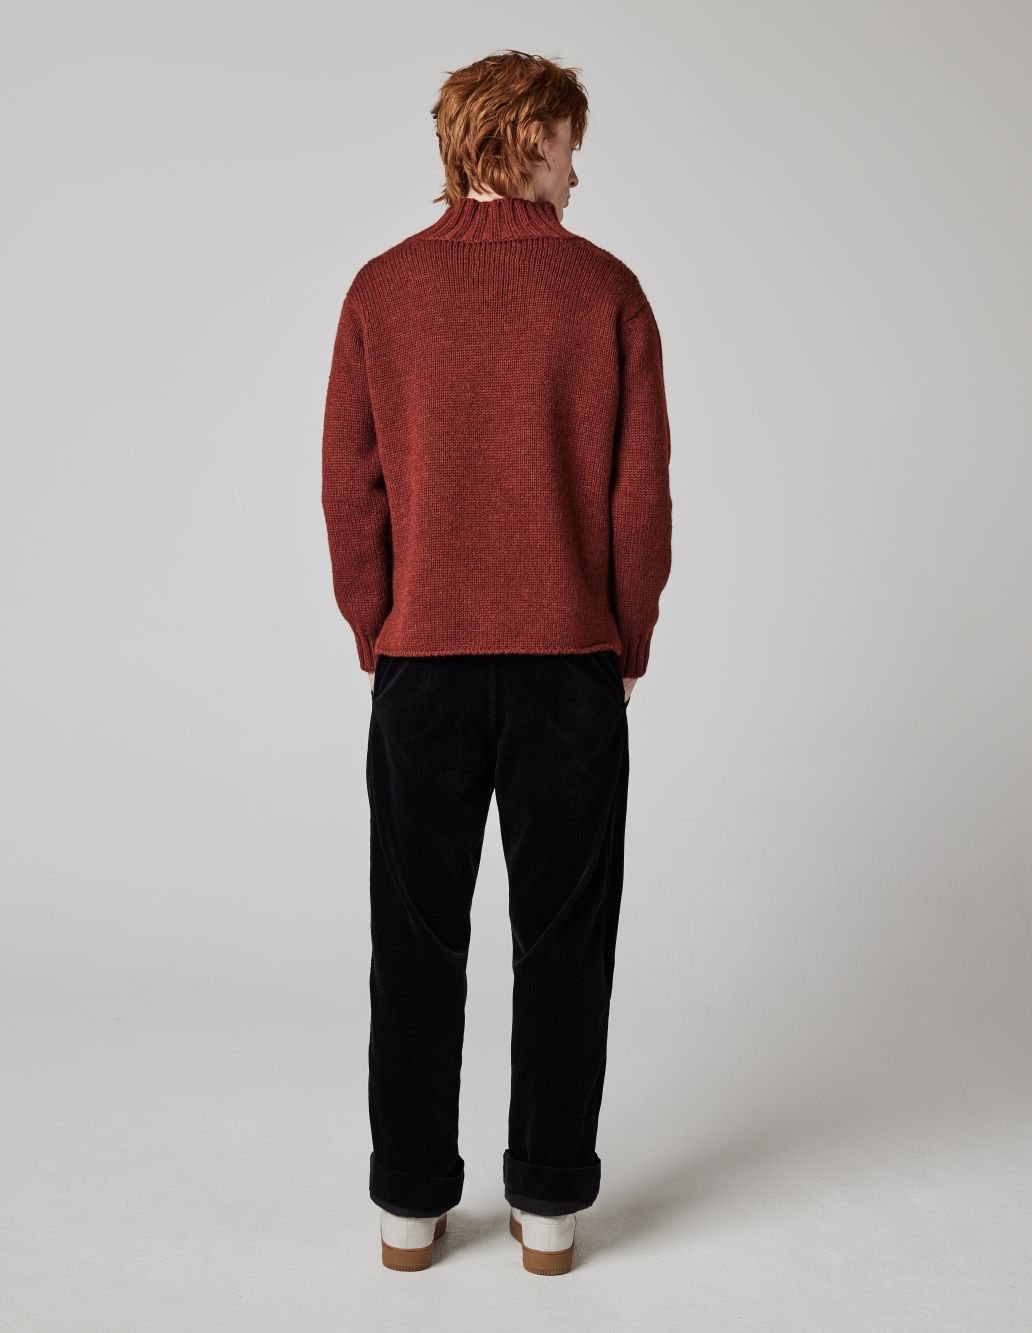 MARGARET HOWELL - Rust wool wide neck sweater | MHL. by Margaret Howell